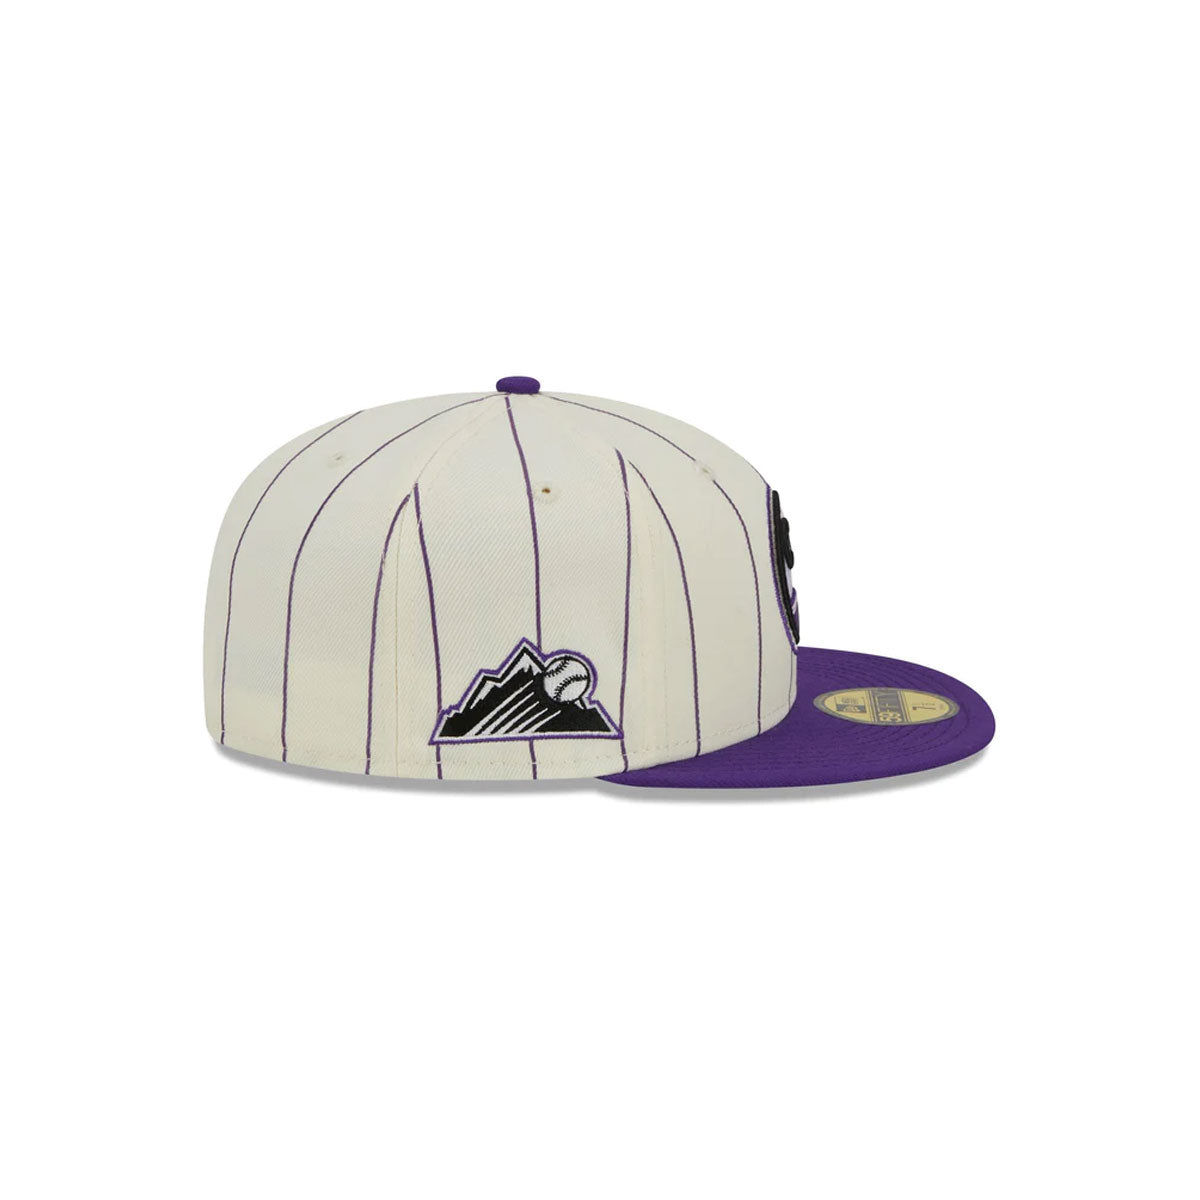 Retro City Colorado Rockies 59FIFTY Fitted